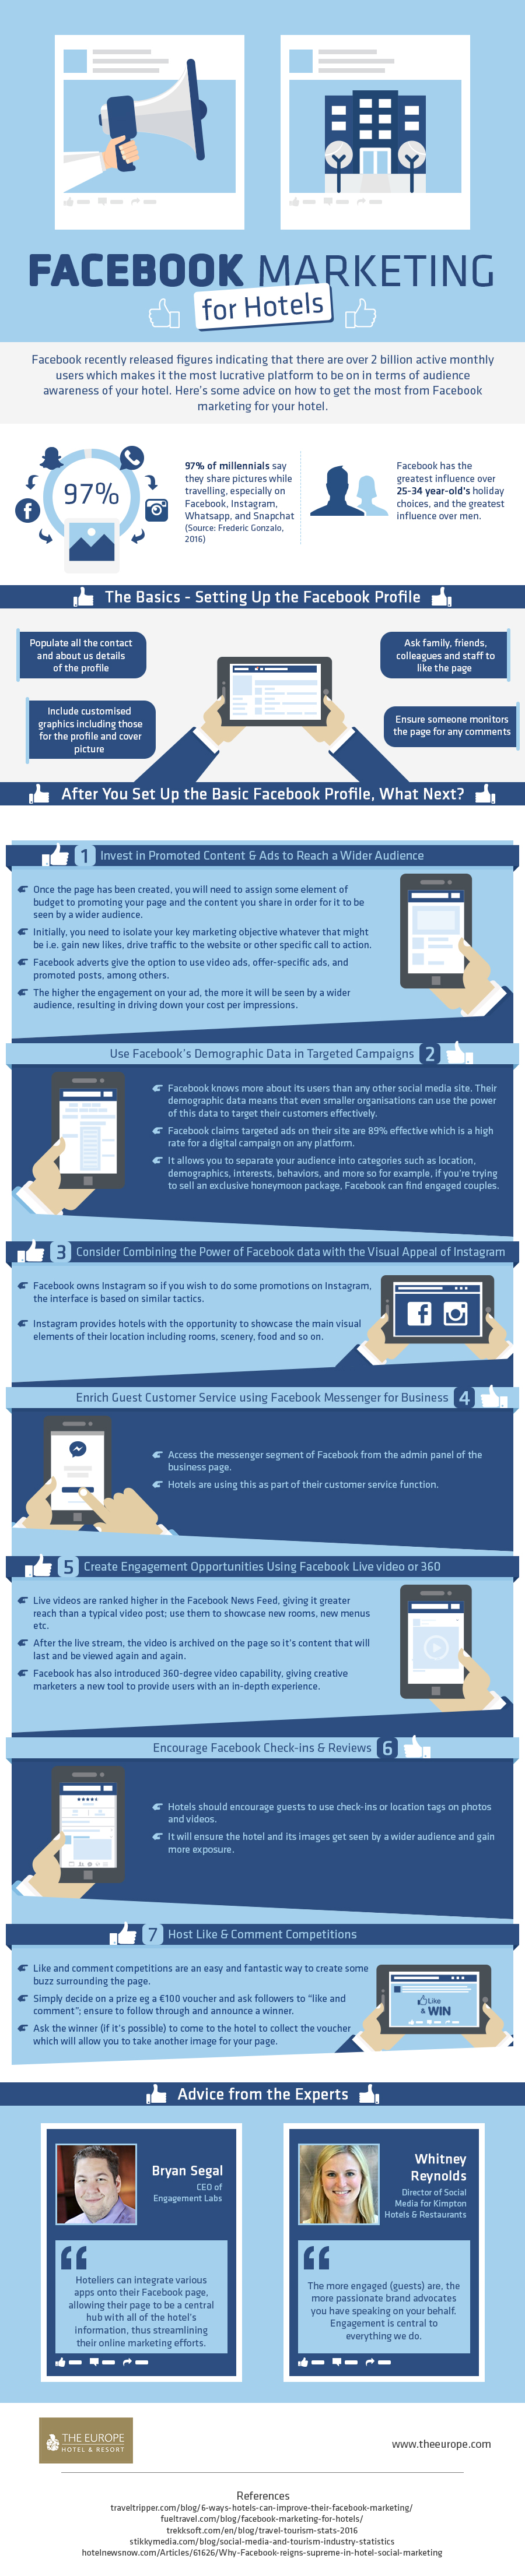 facebook marketing info graphic for hotels